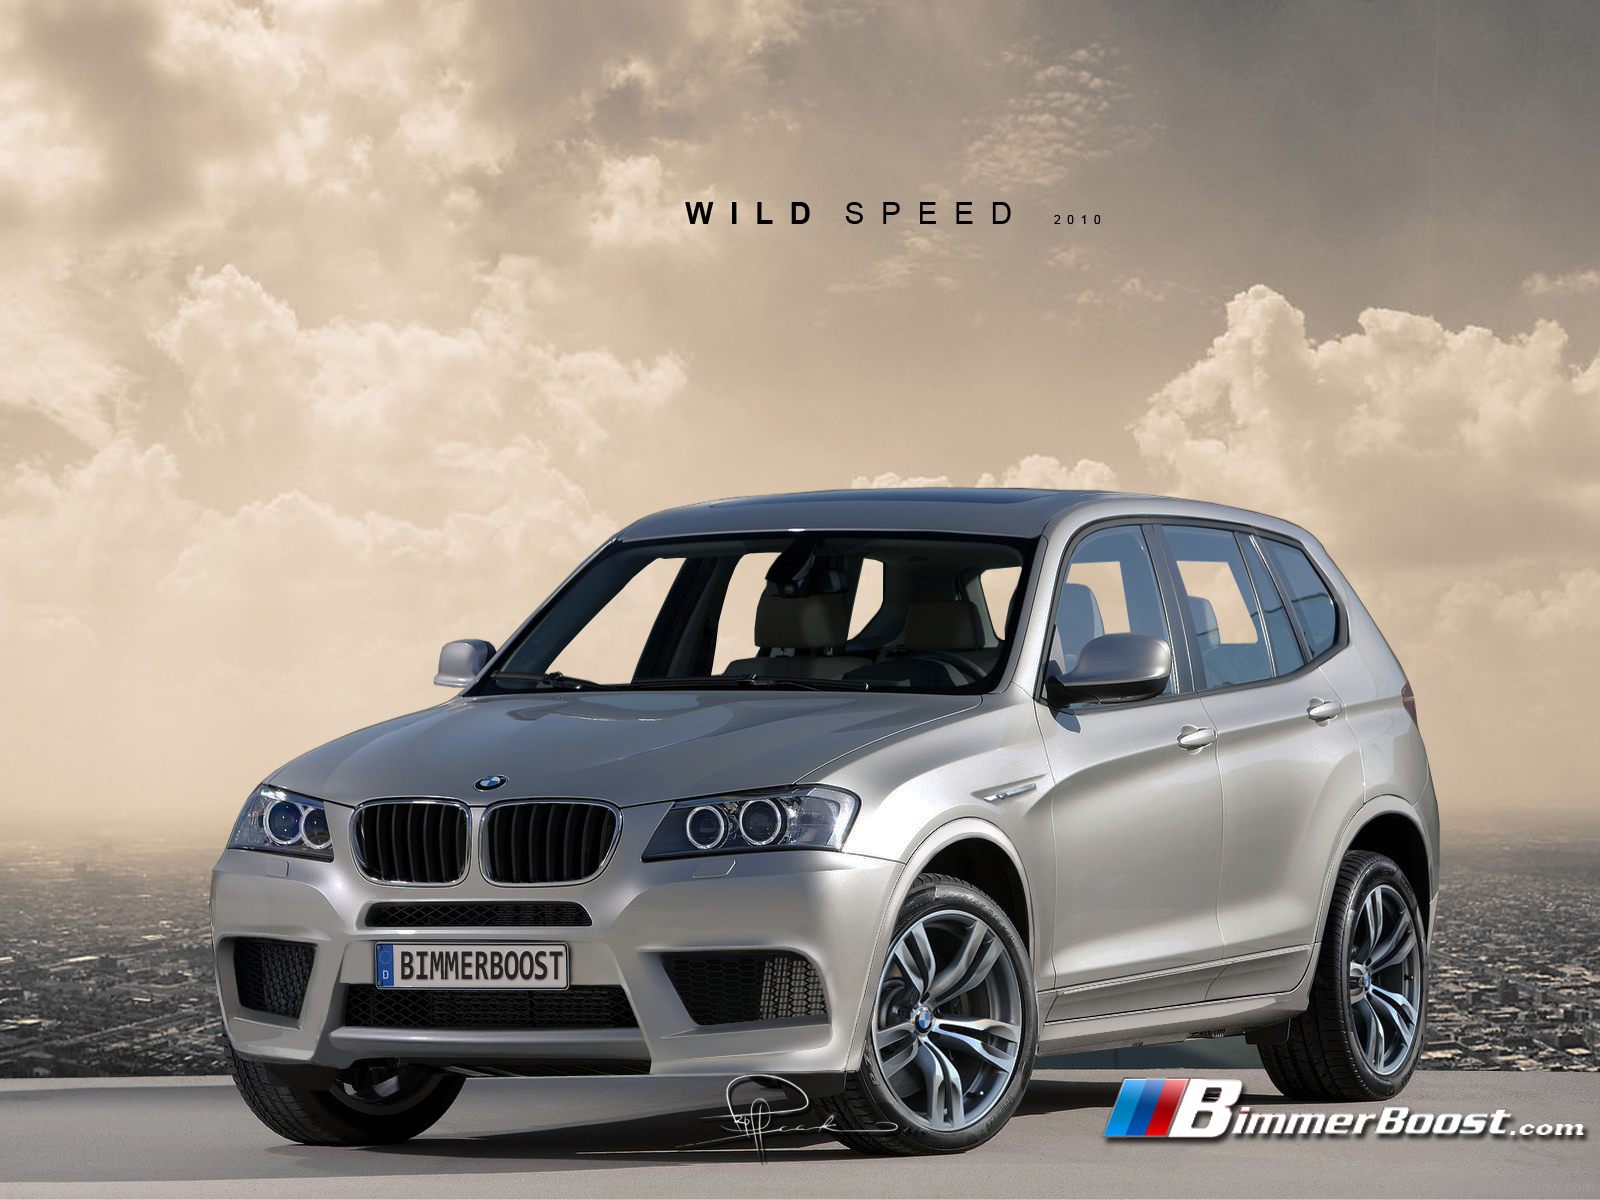 BMW X3 25. View Download Wallpaper. 1600x1200. Comments